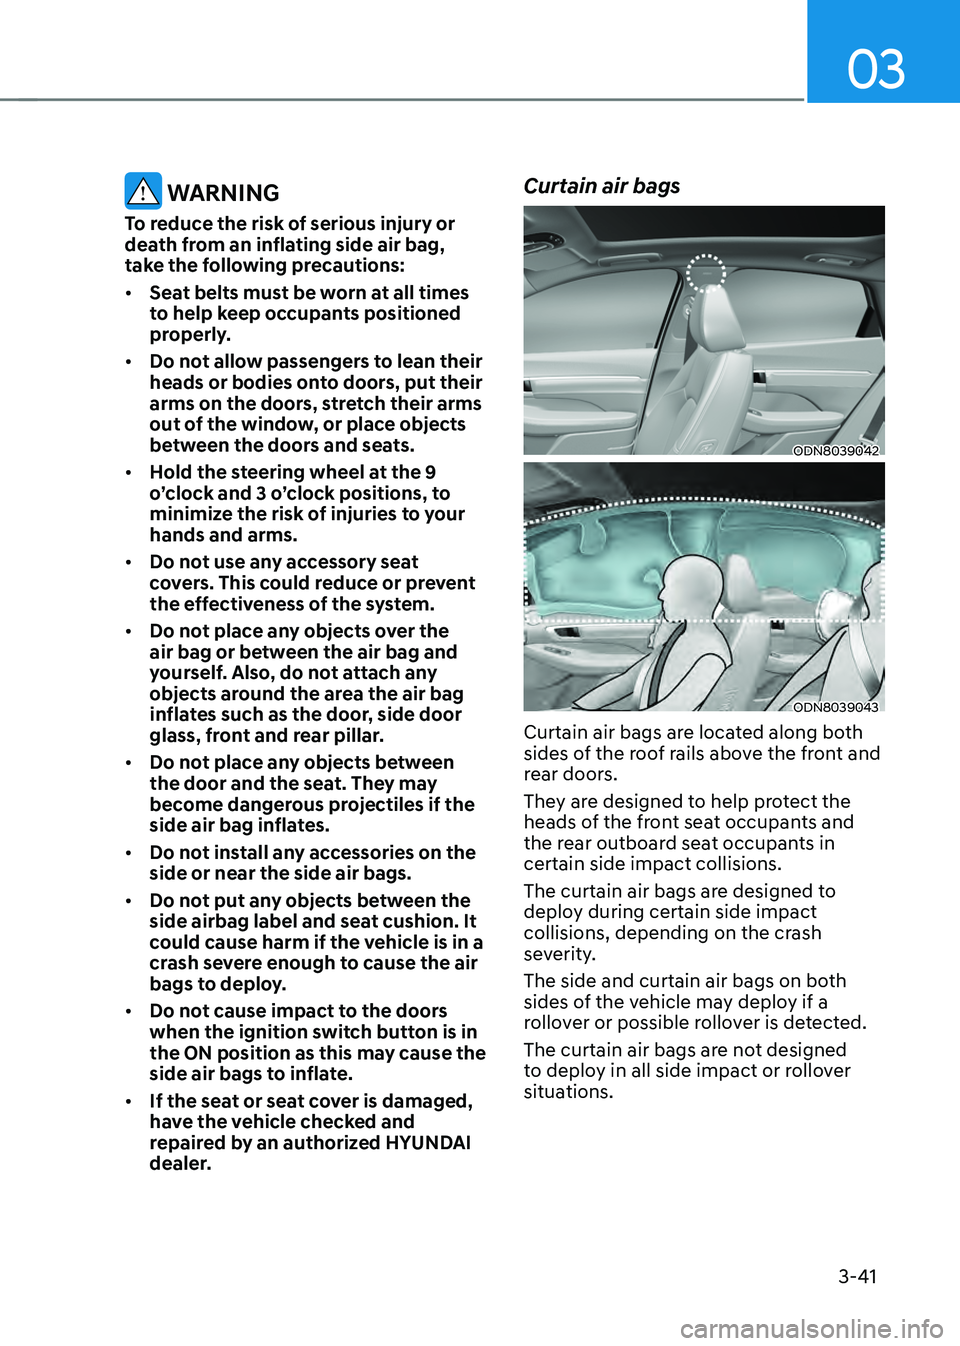 HYUNDAI SONATA HYBRID 2021  Owners Manual 03
3-41
 WARNING
To reduce the risk of serious injury or 
death from an inflating side air bag, 
take the following precautions:
•	Seat belts must be worn at all times 
to help keep occupants positi